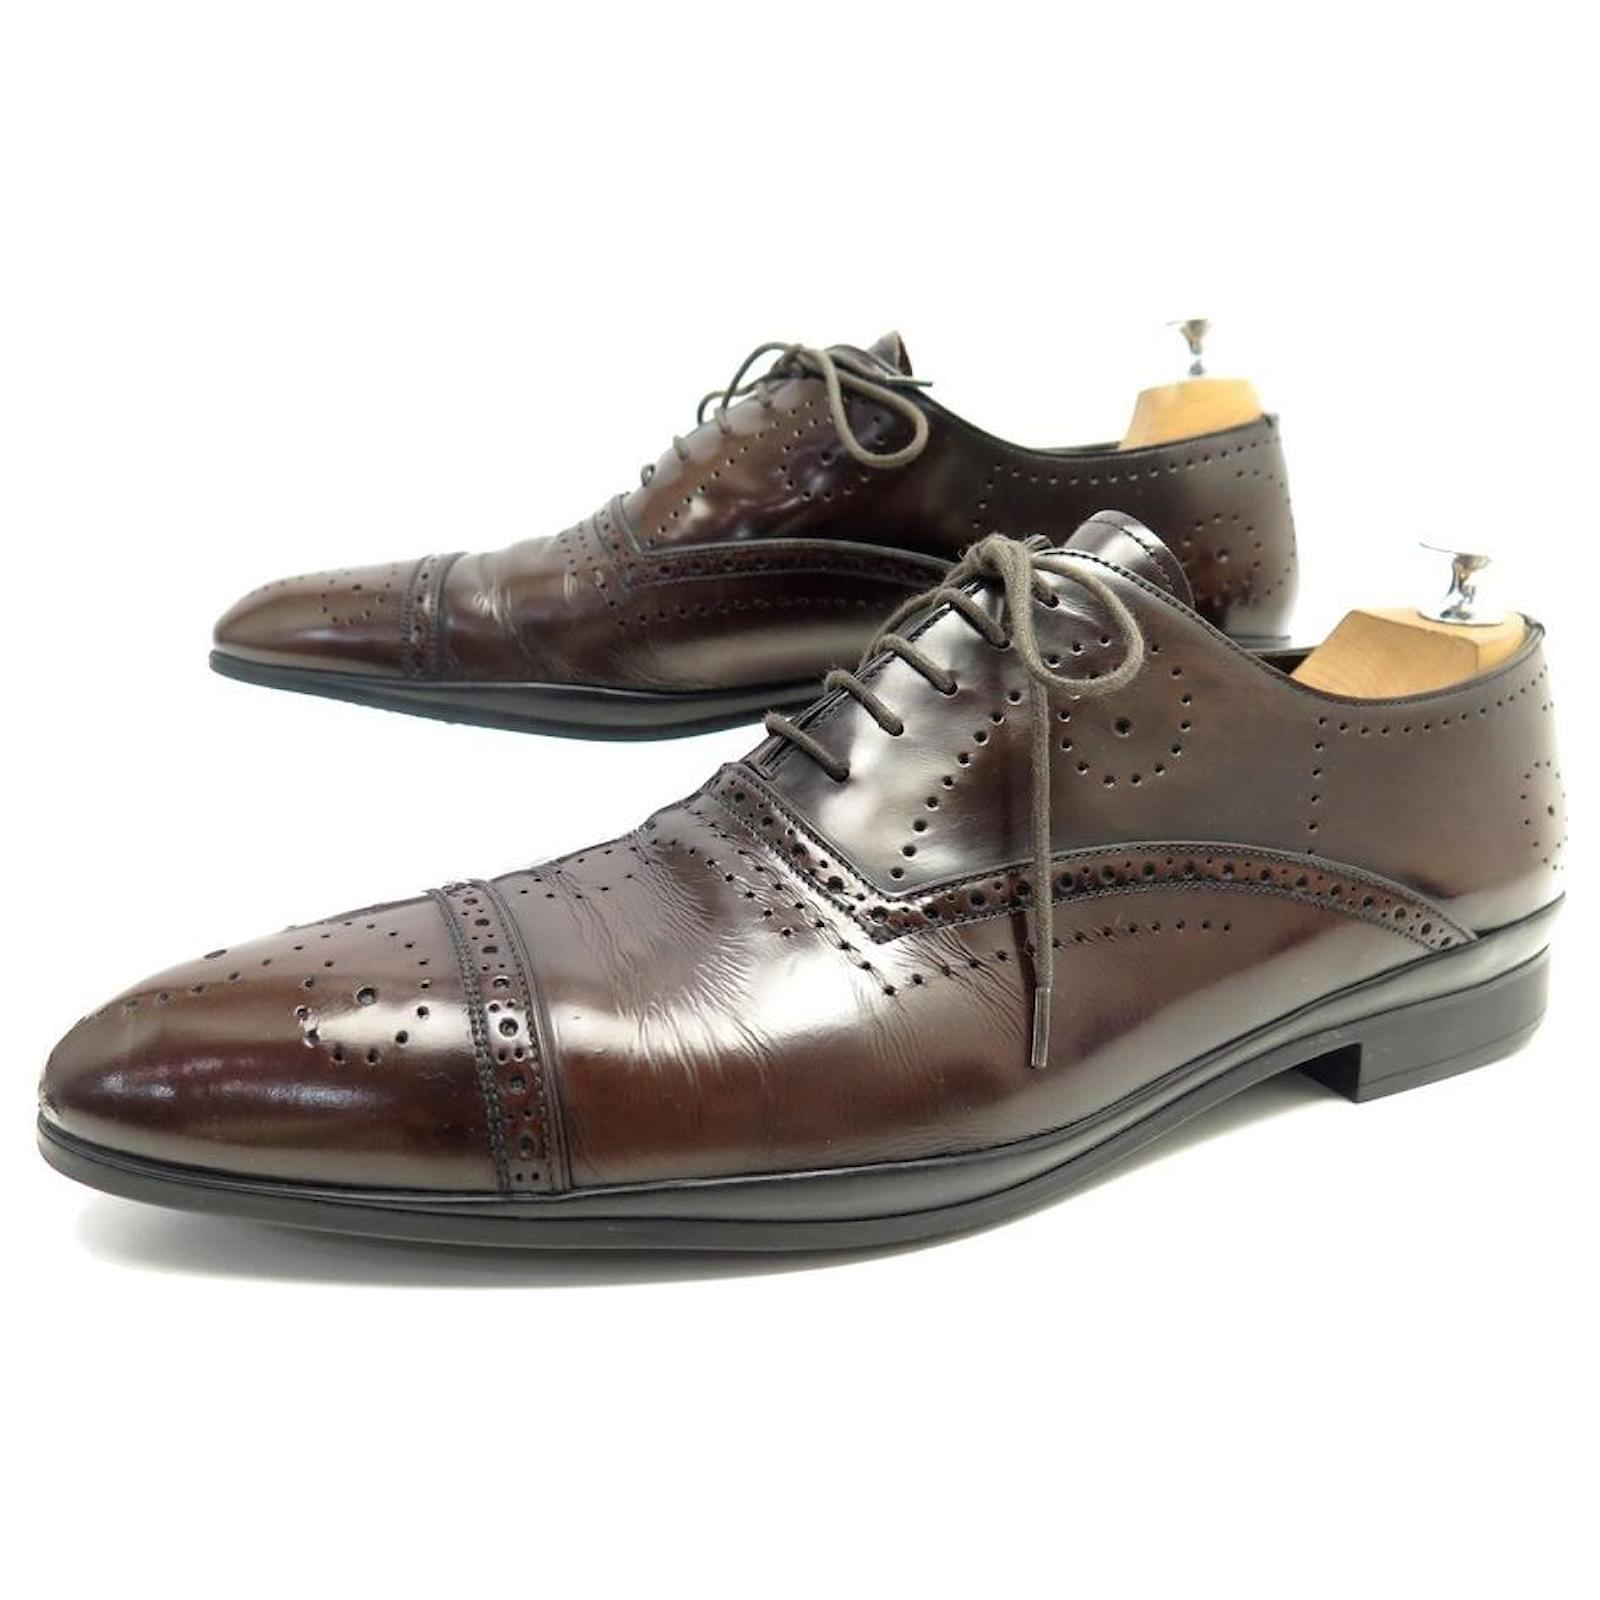 PRADA BROWN OXFORD SHOES IN BROWN LEATHER 11 45 BROWN LEATHER SHOES Black   - Joli Closet